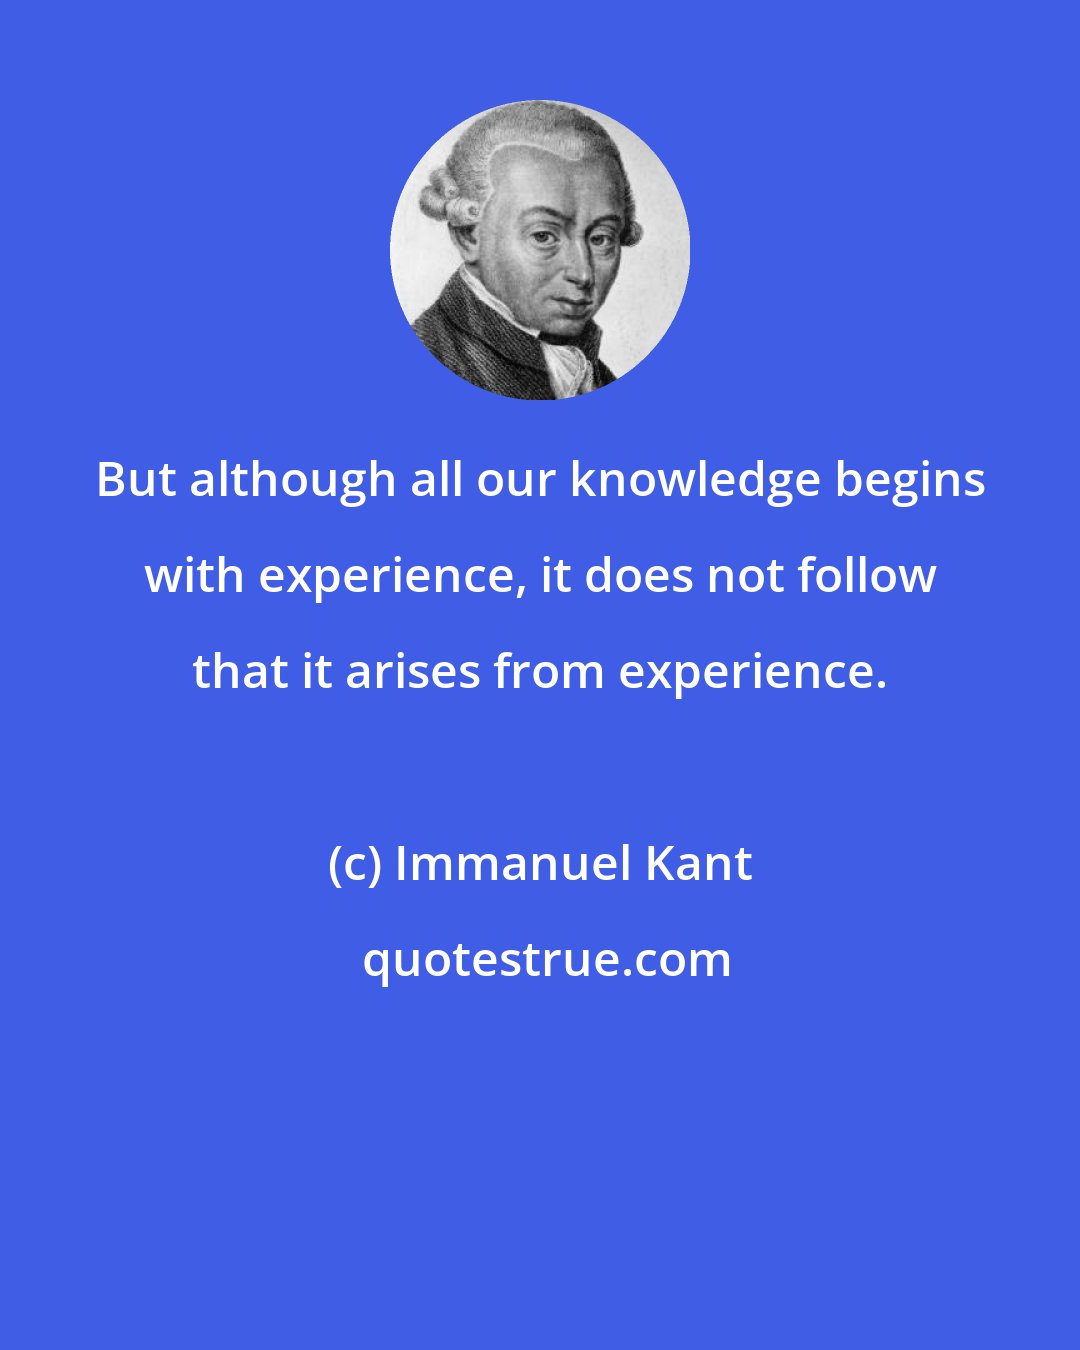 Immanuel Kant: But although all our knowledge begins with experience, it does not follow that it arises from experience.